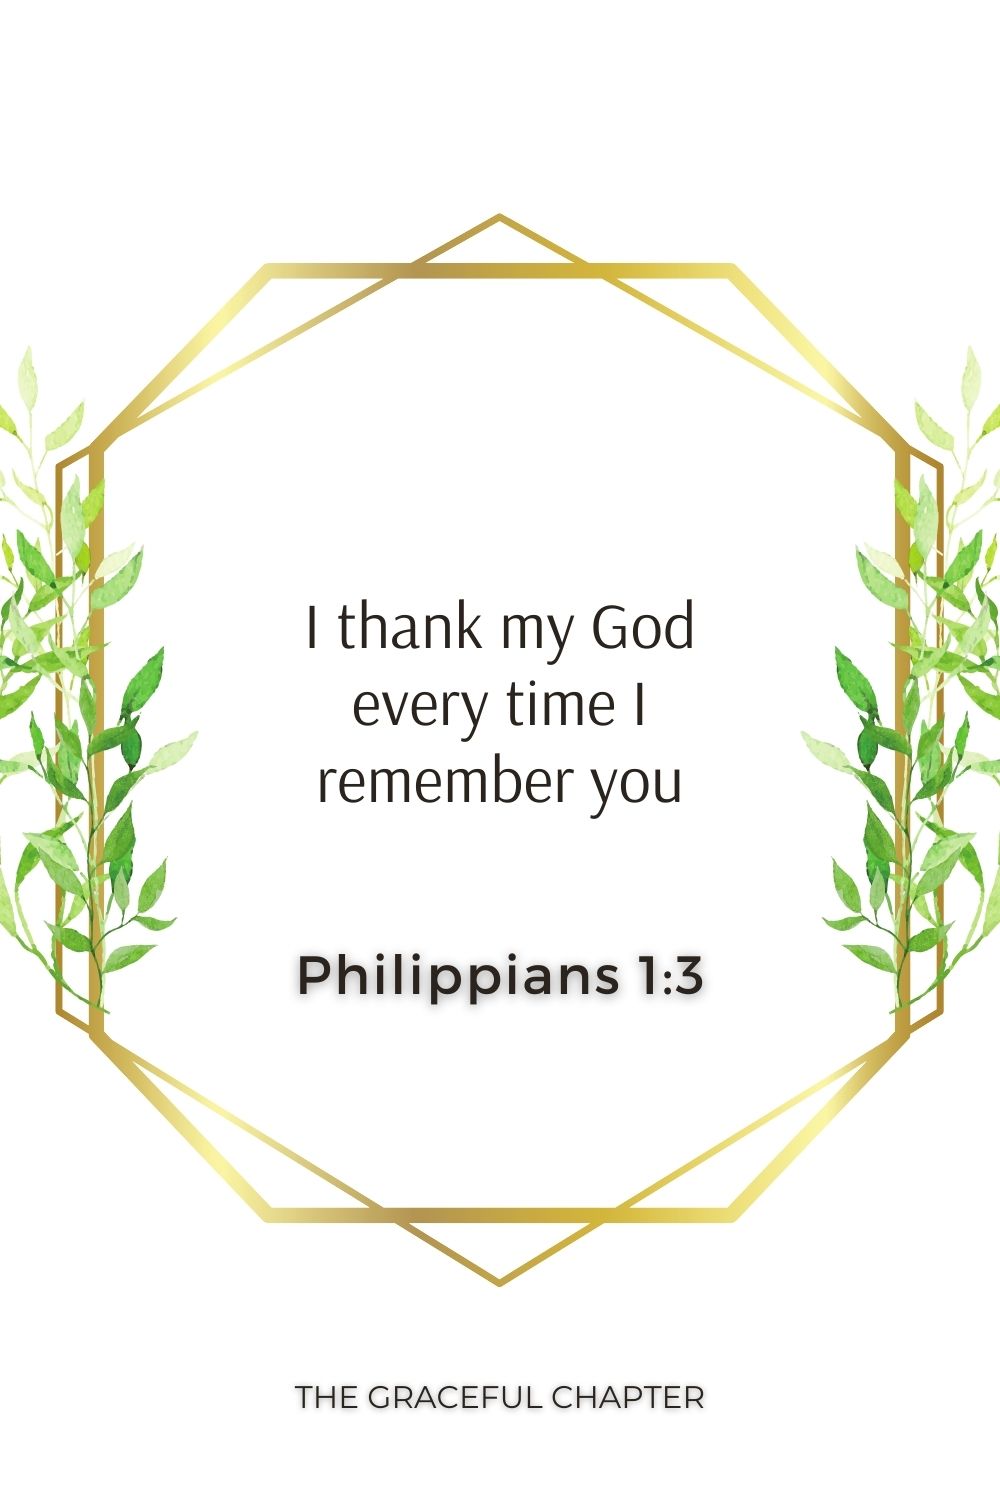 I thank my God every time I remember you. Philippians 1:3